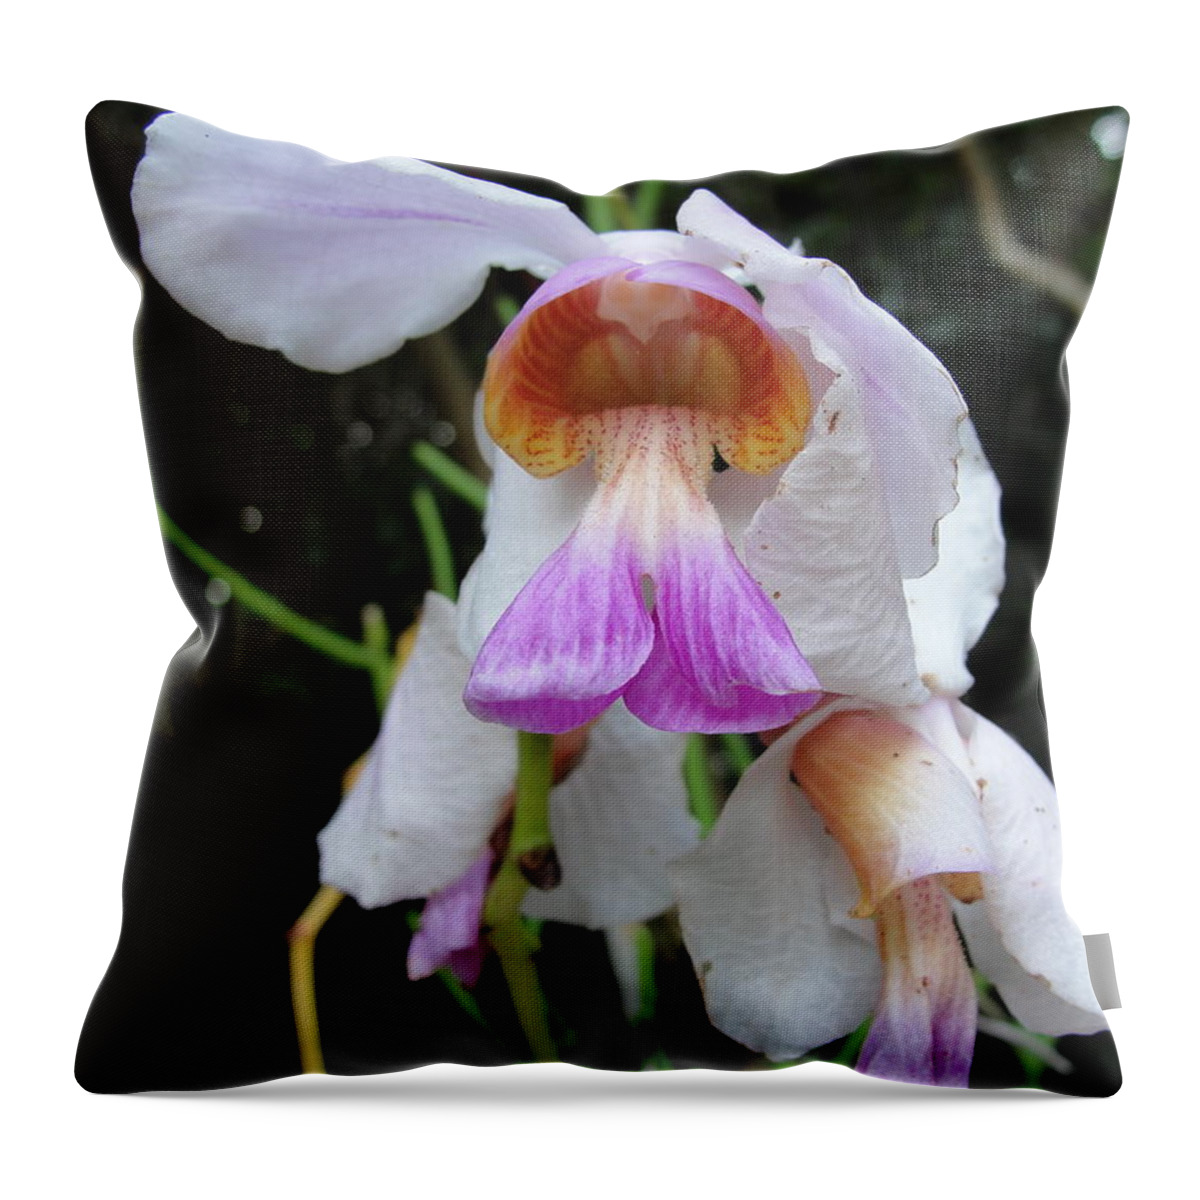 Lilac And Mango Orchid Throw Pillow featuring the photograph Lilac And Mango Orchid by Susan Nash